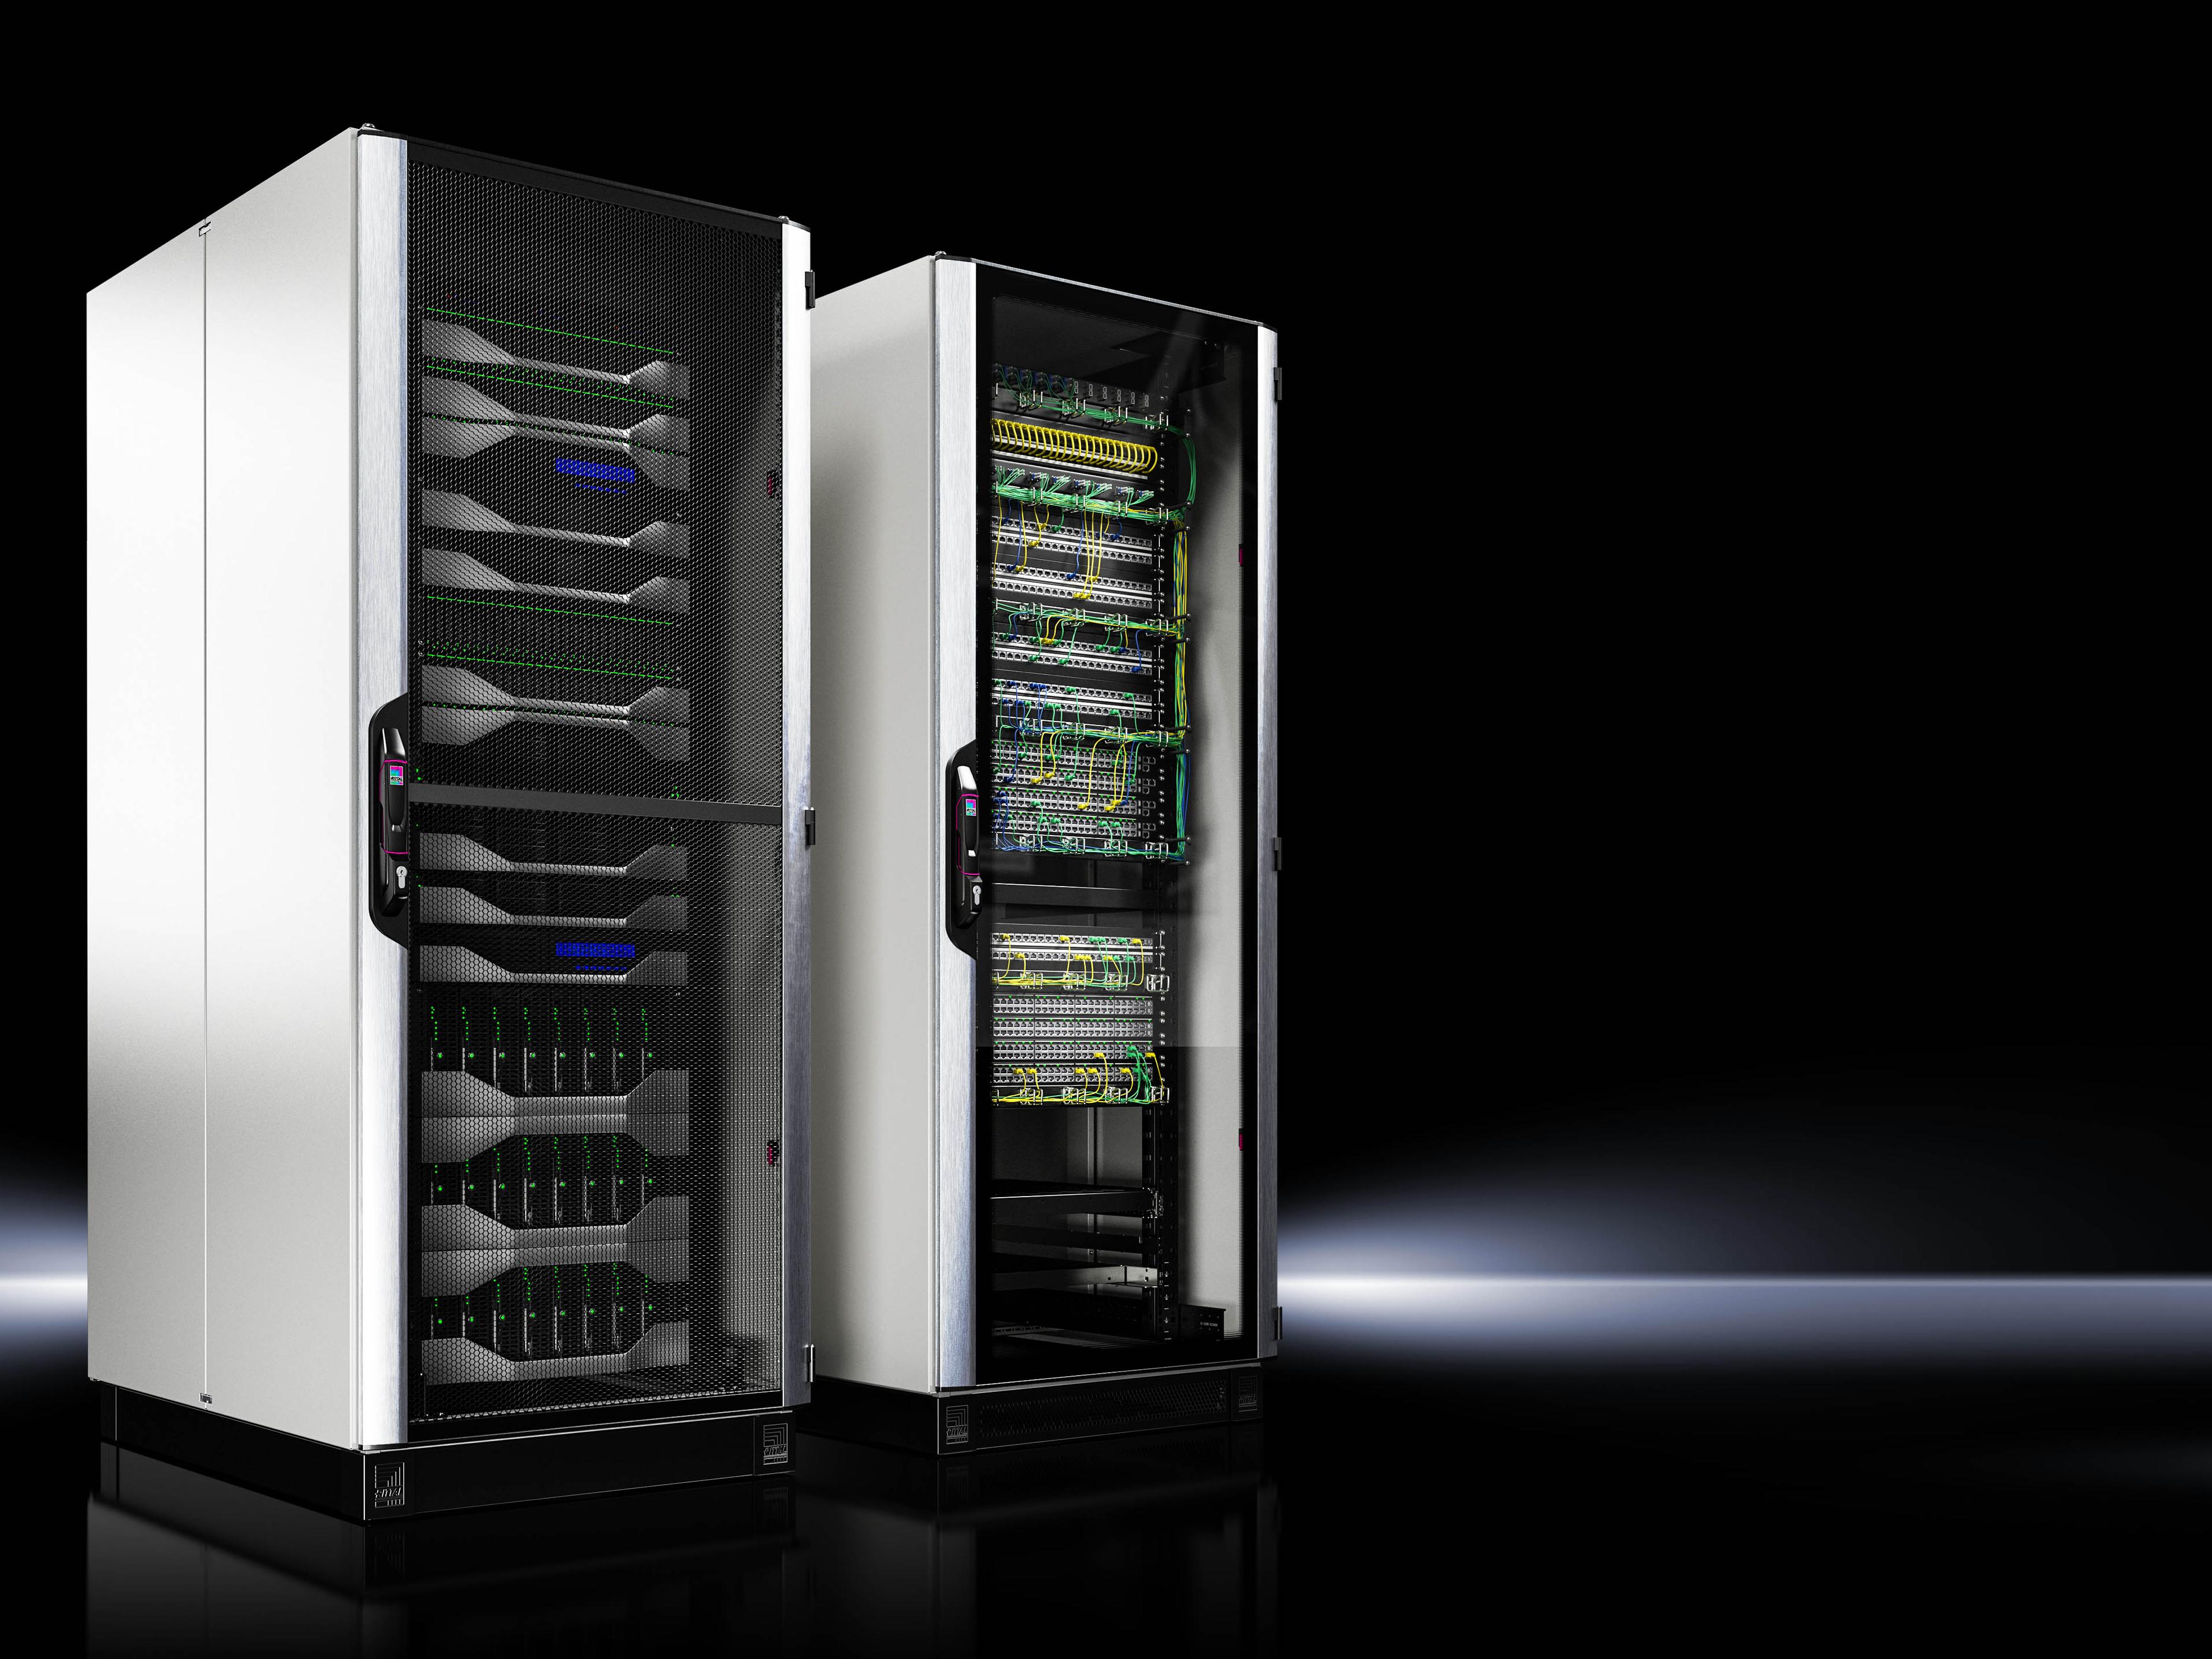 New VX IT rack system launched by Rittal